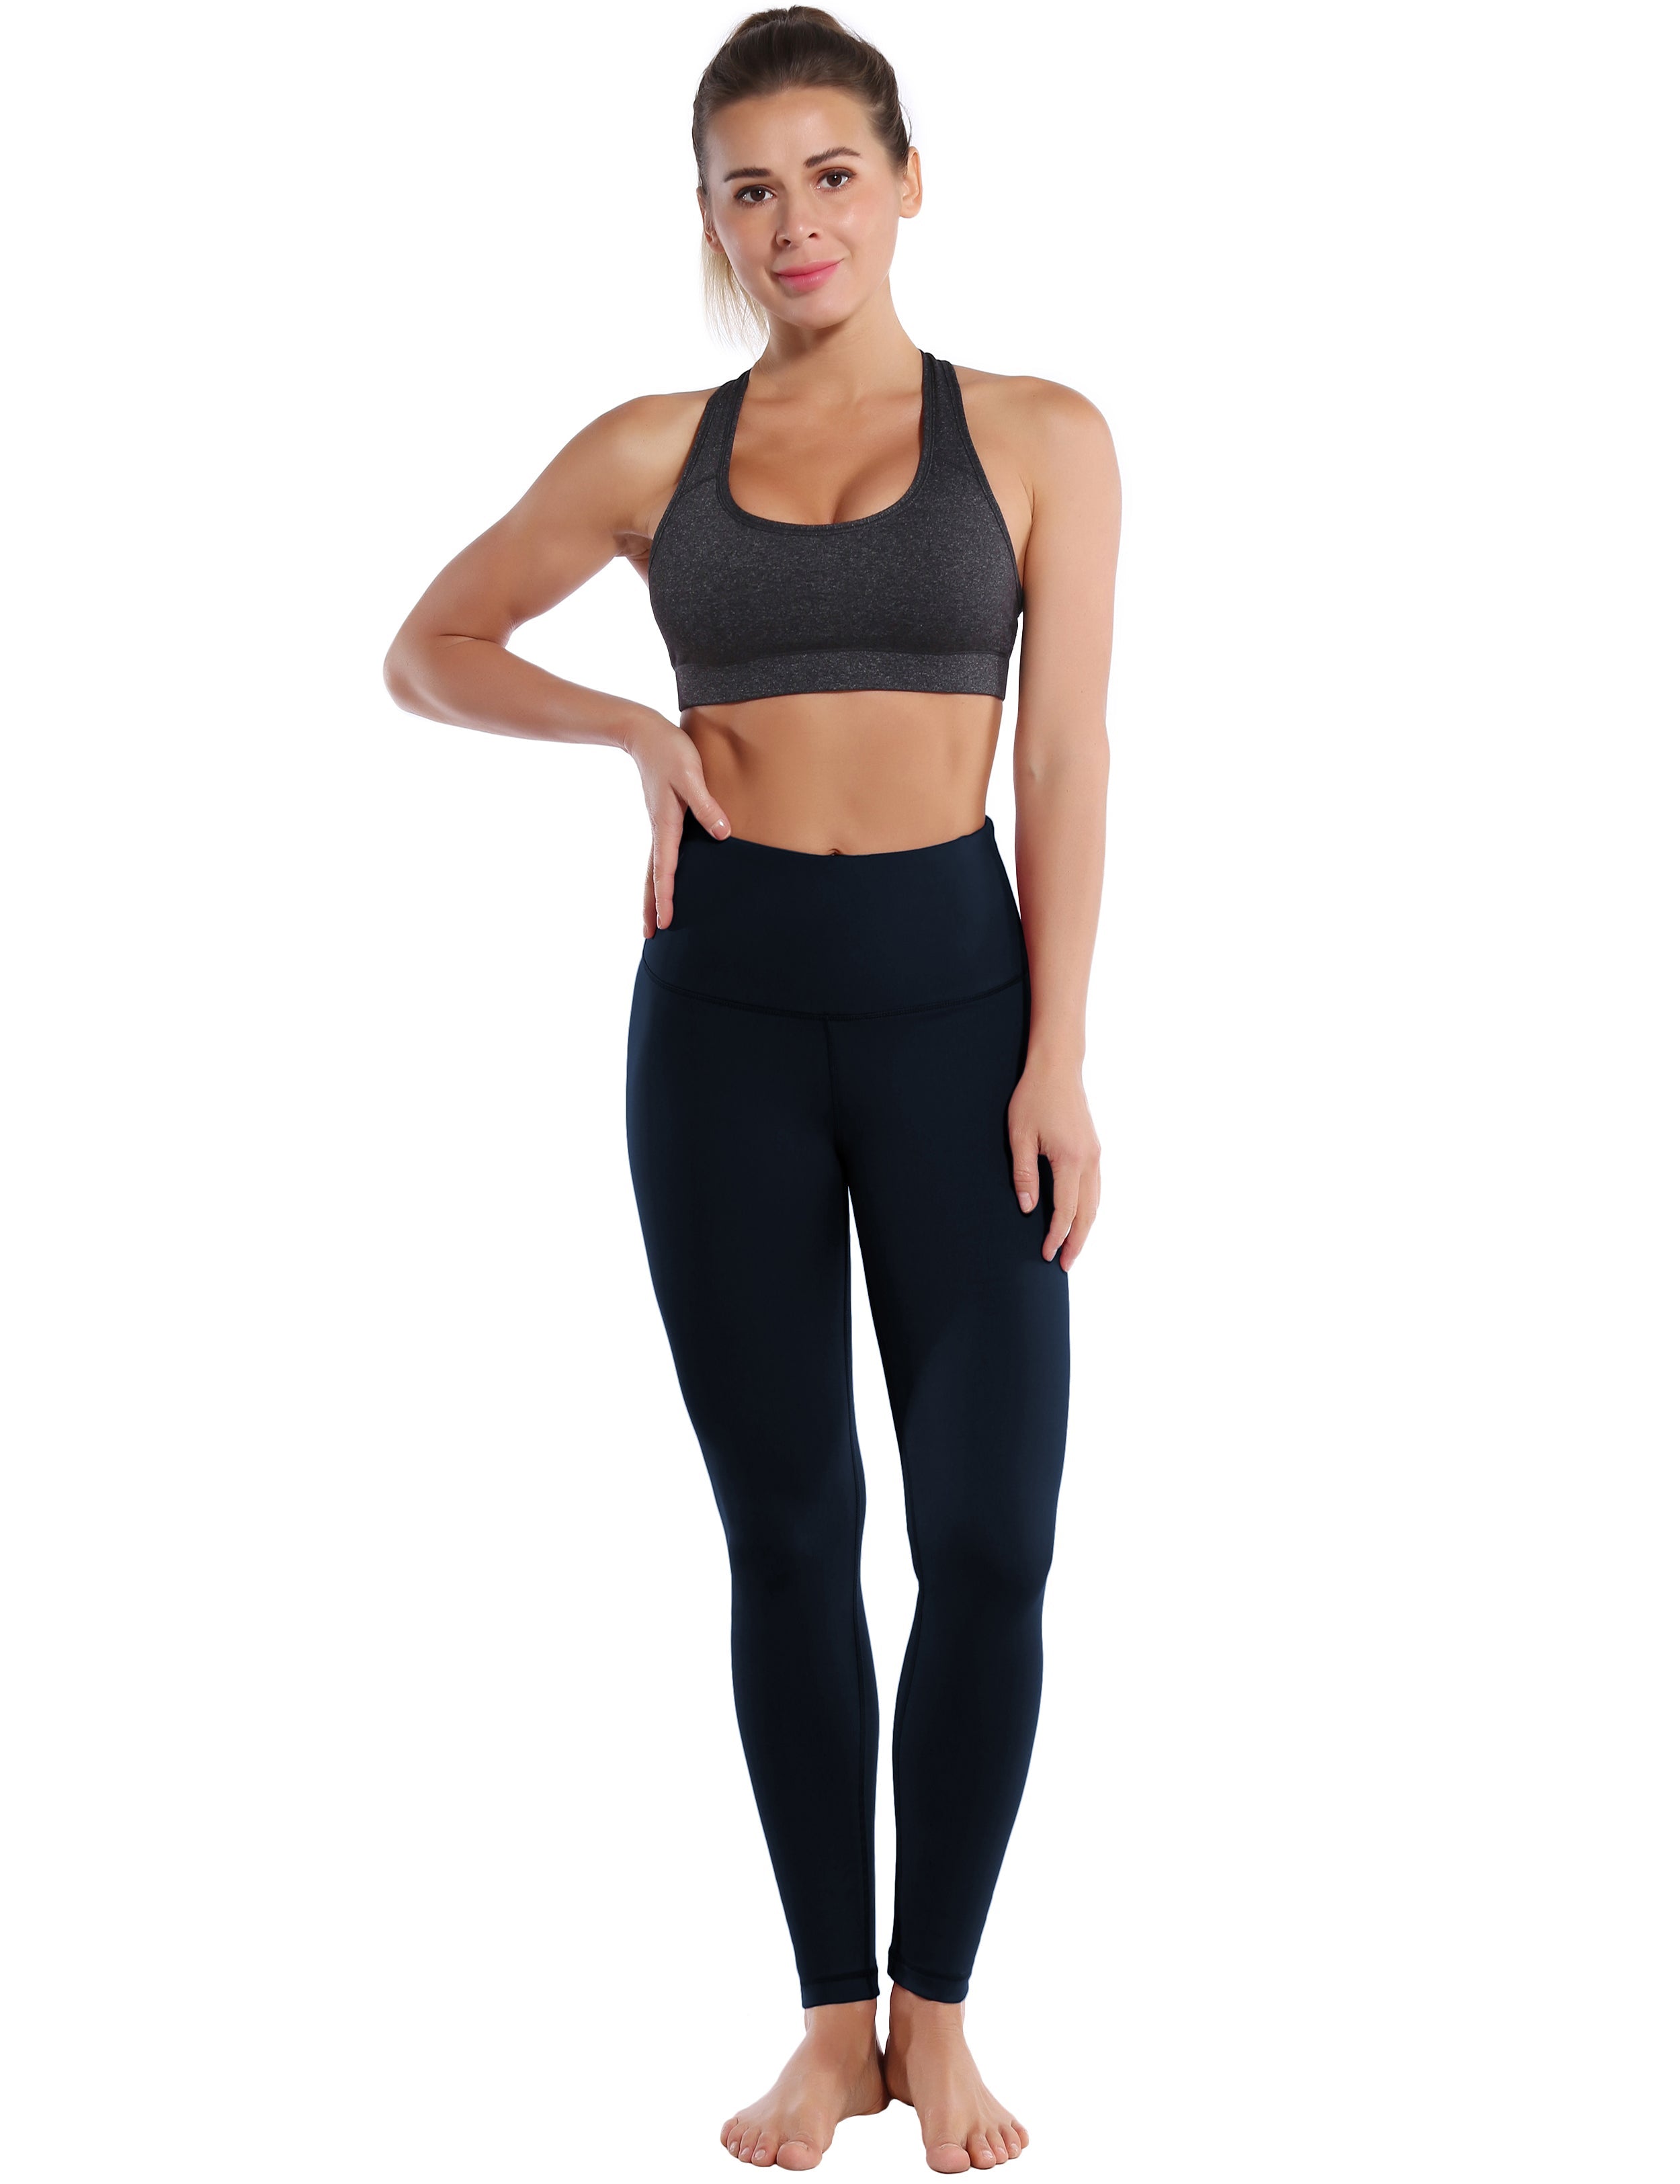 High Waist Jogging Pants darknavy 75%Nylon/25%Spandex Fabric doesn't attract lint easily 4-way stretch No see-through Moisture-wicking Tummy control Inner pocket Four lengths